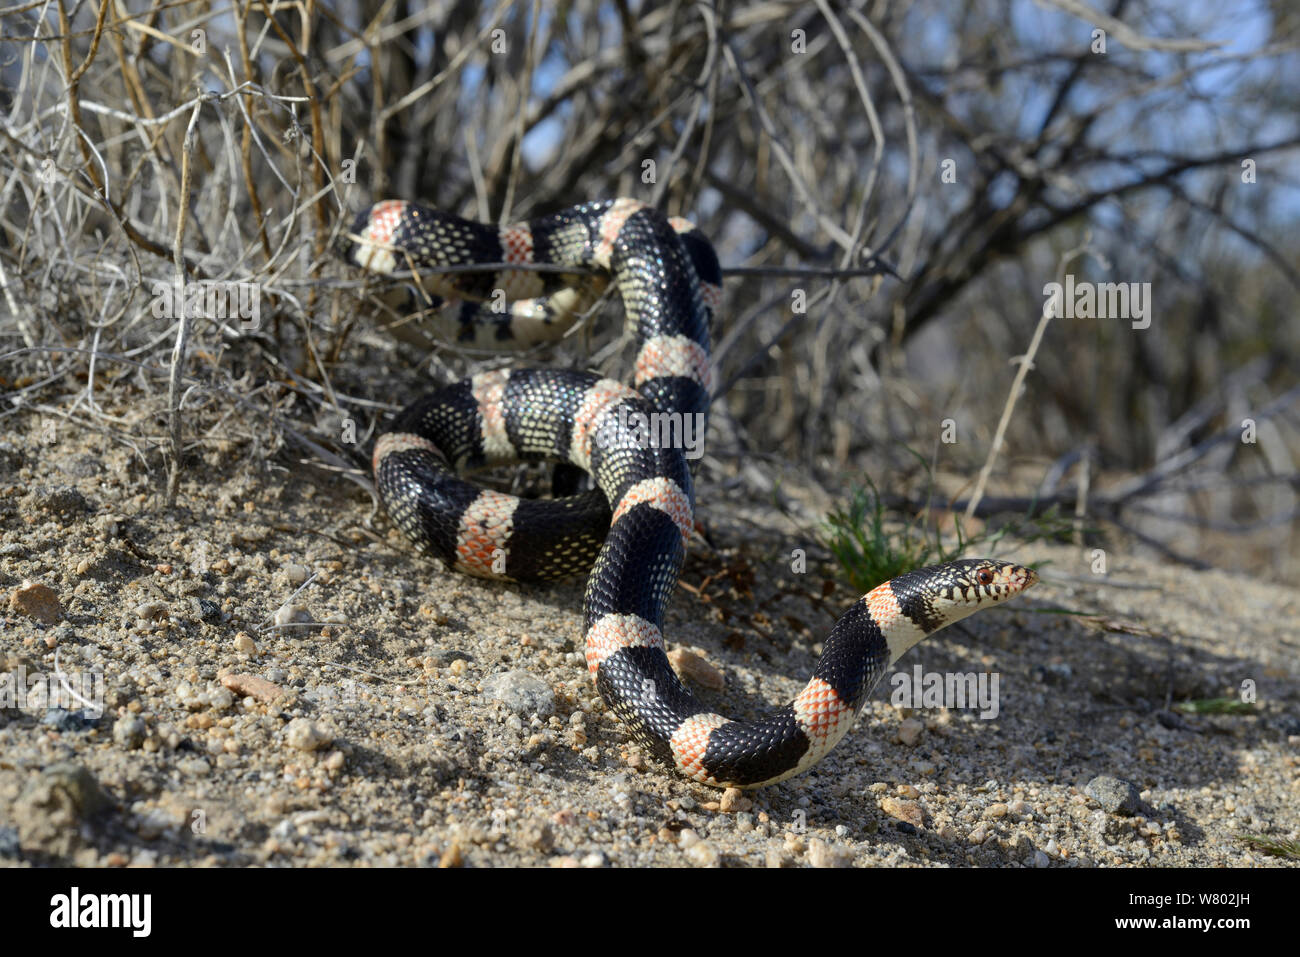 Long-nosed snake (Rhinocheilus lecontei) in bush, Panamint mountains, Death Valley National Park, California, USA. May. Stock Photo